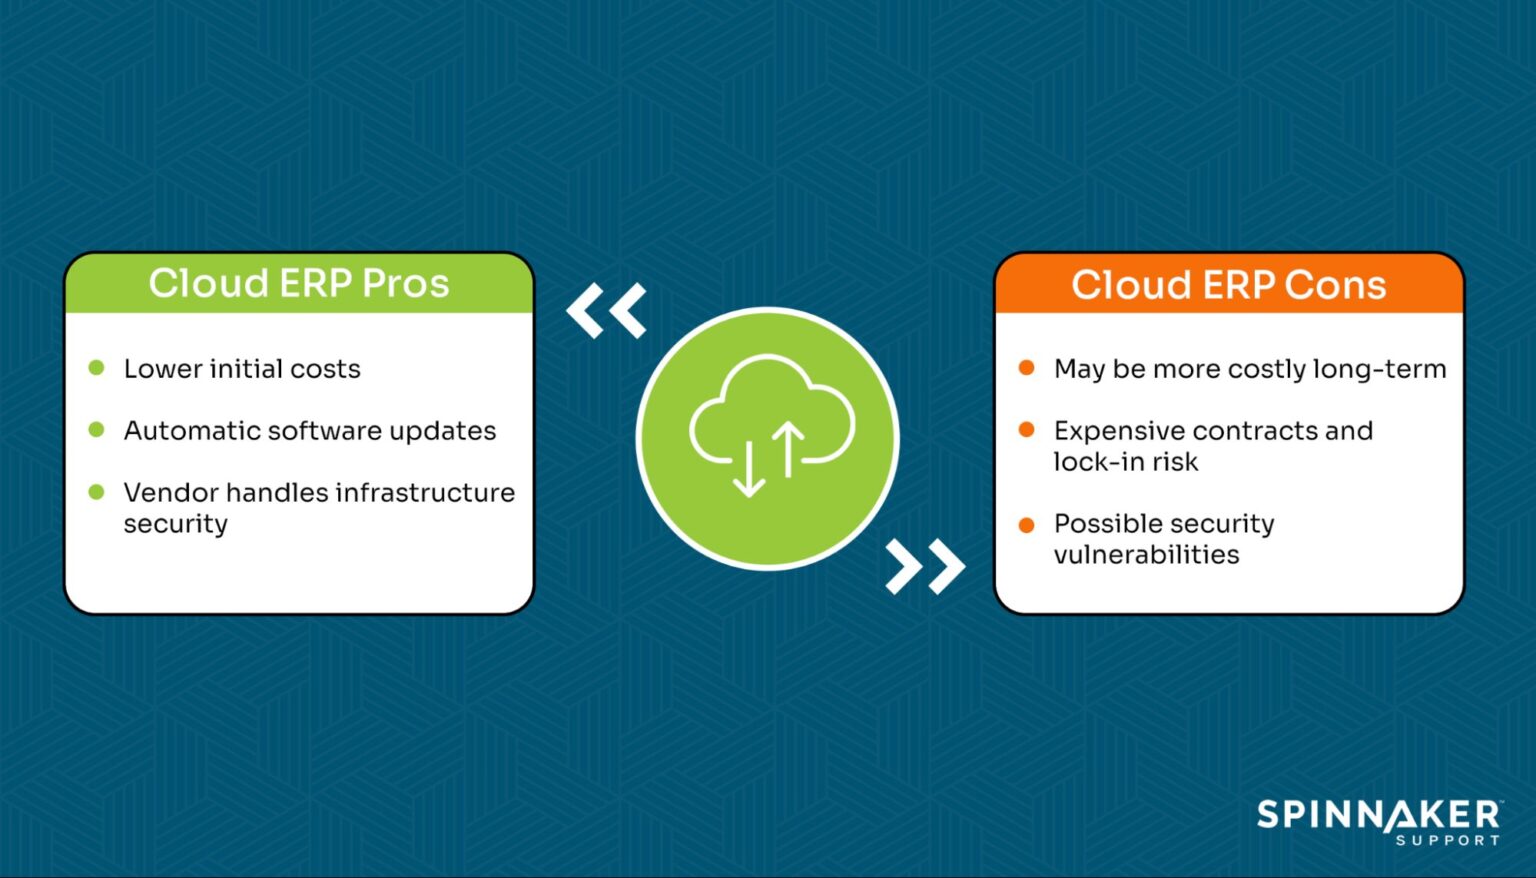 Advantages and disadvantages of cloud-based ERP